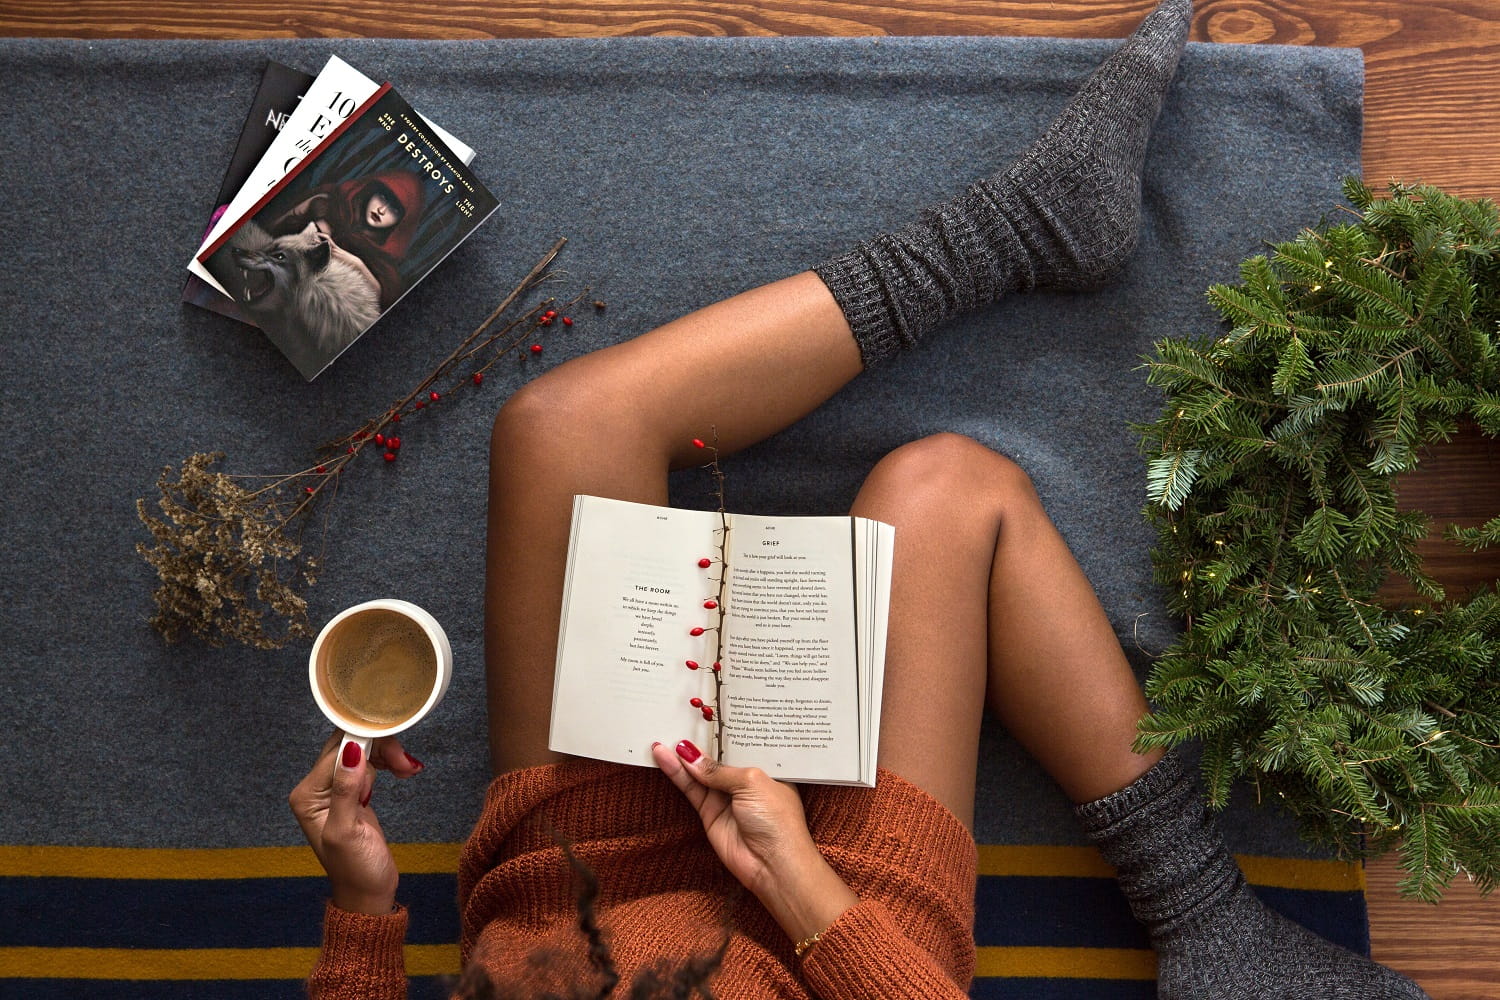 Overhead shot of women in socks reading book with coffee and festive decor